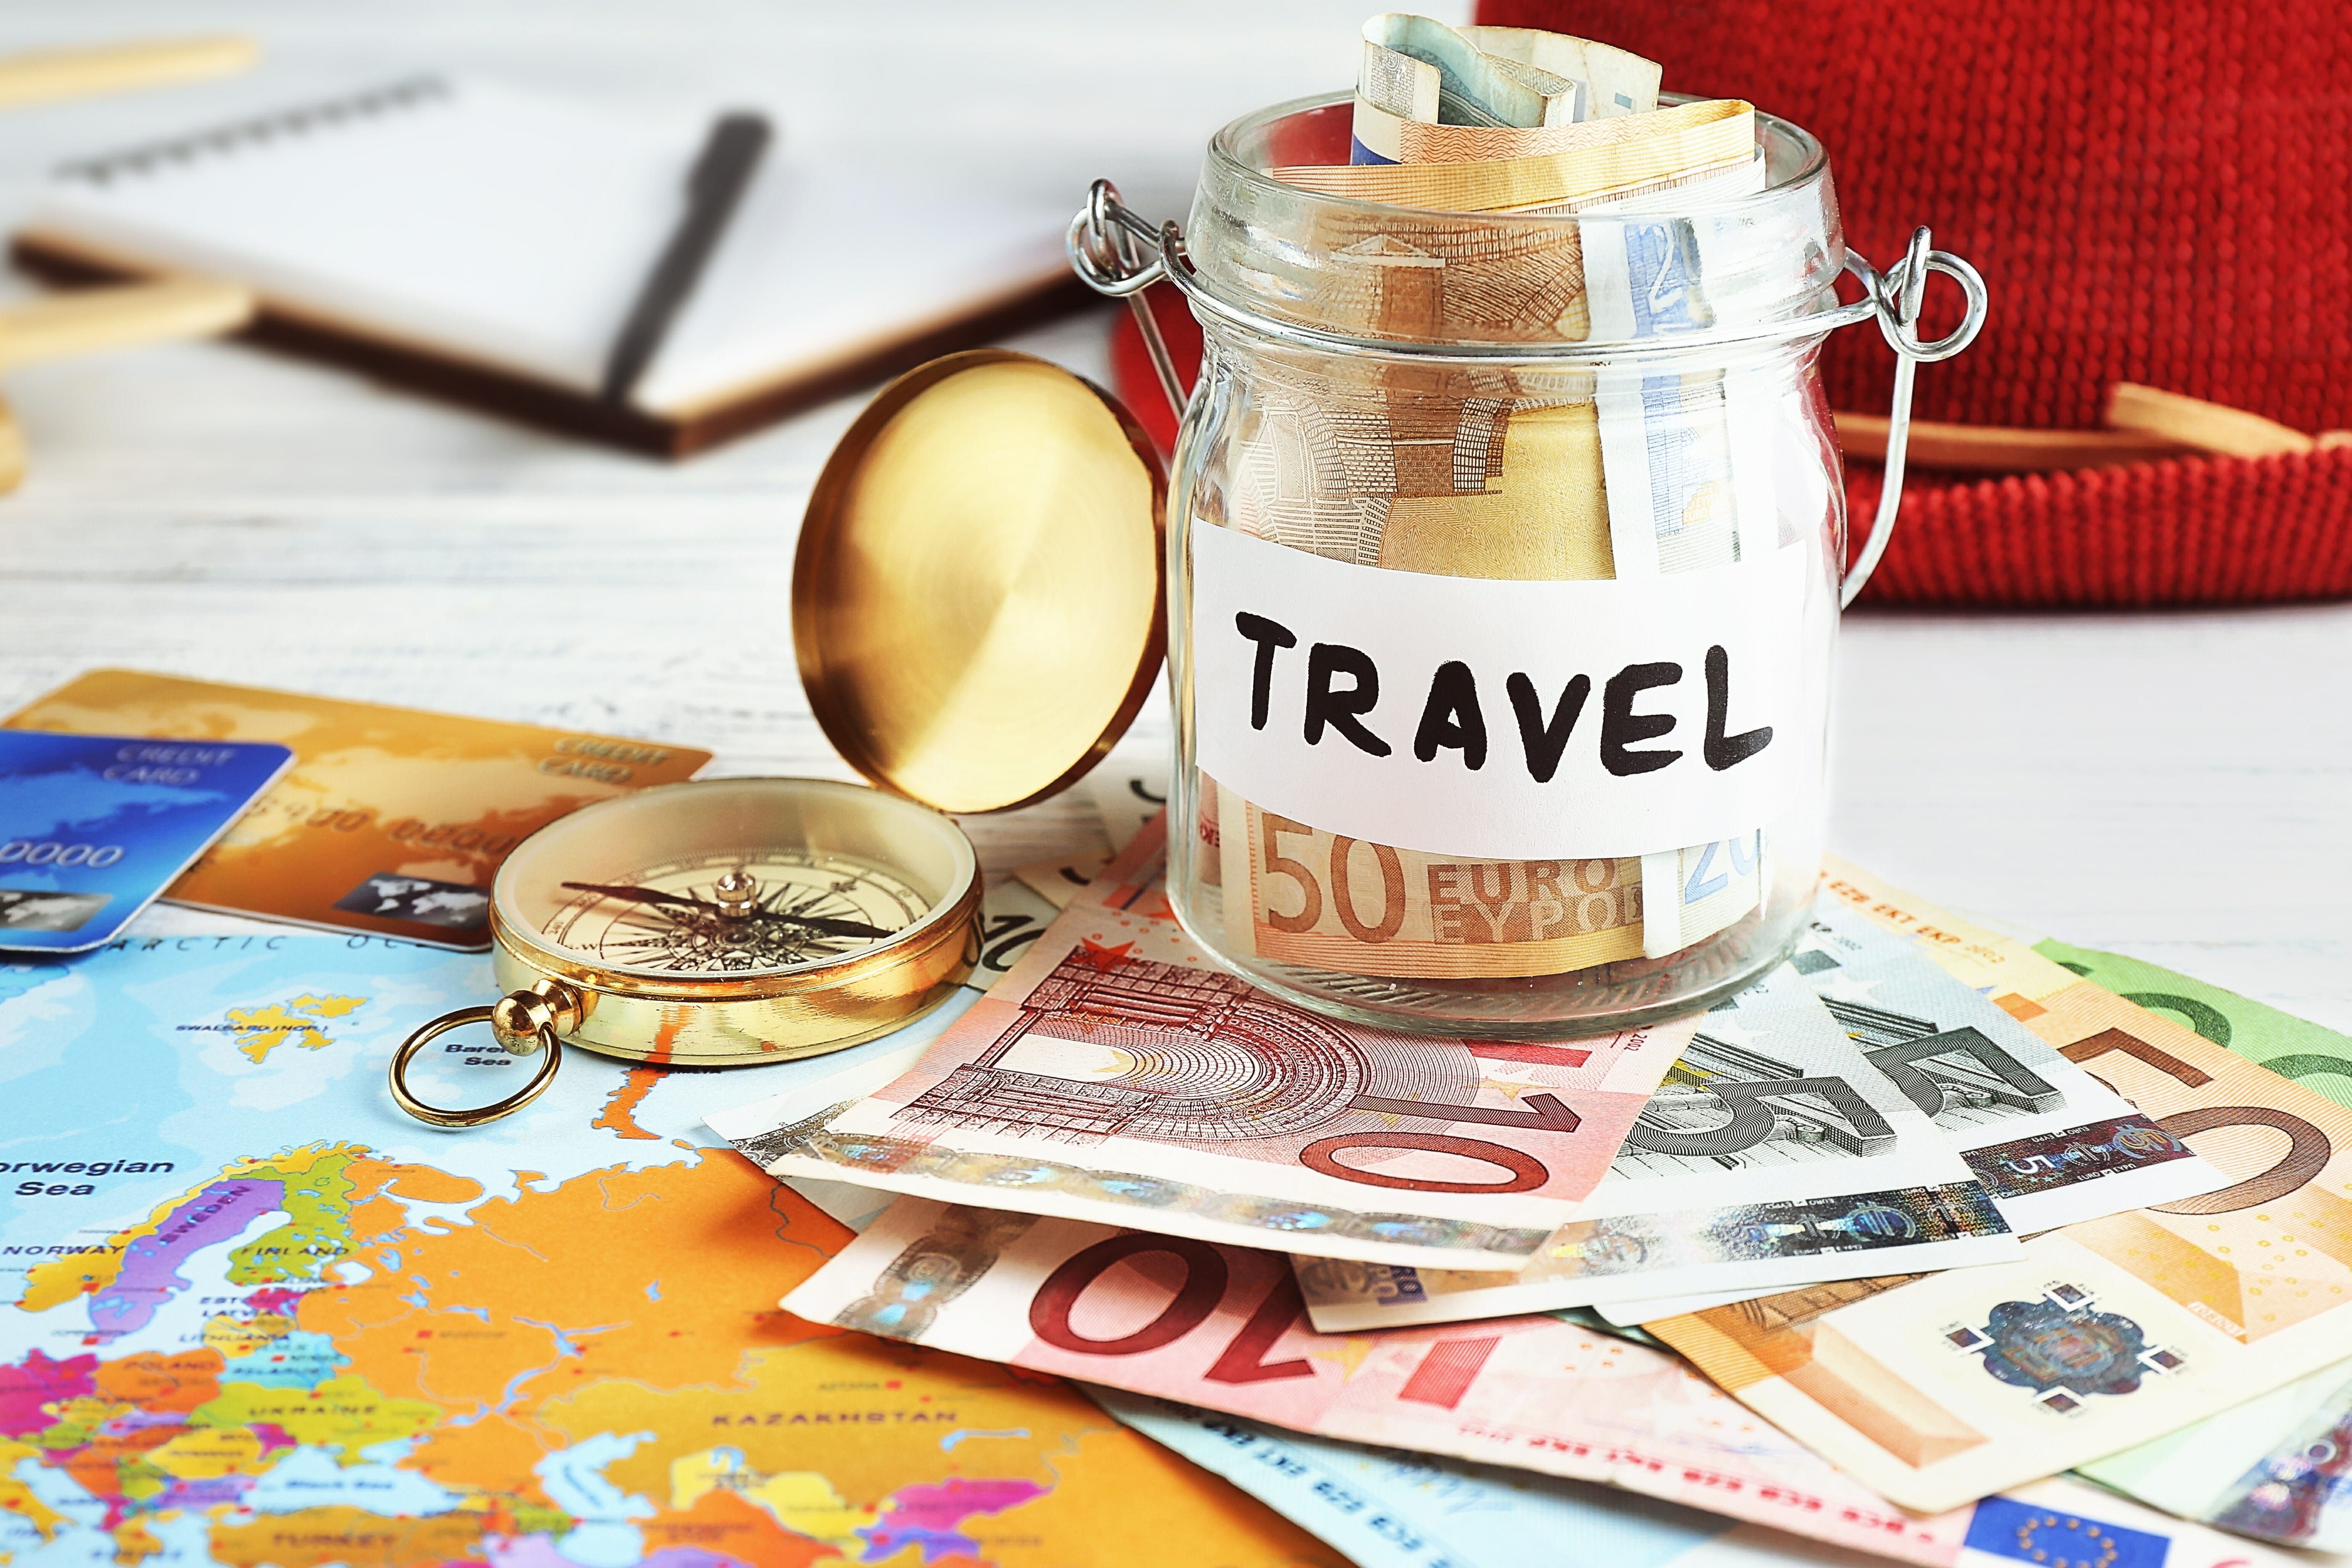 Travel money savings in a glass jar with compass, map and hat